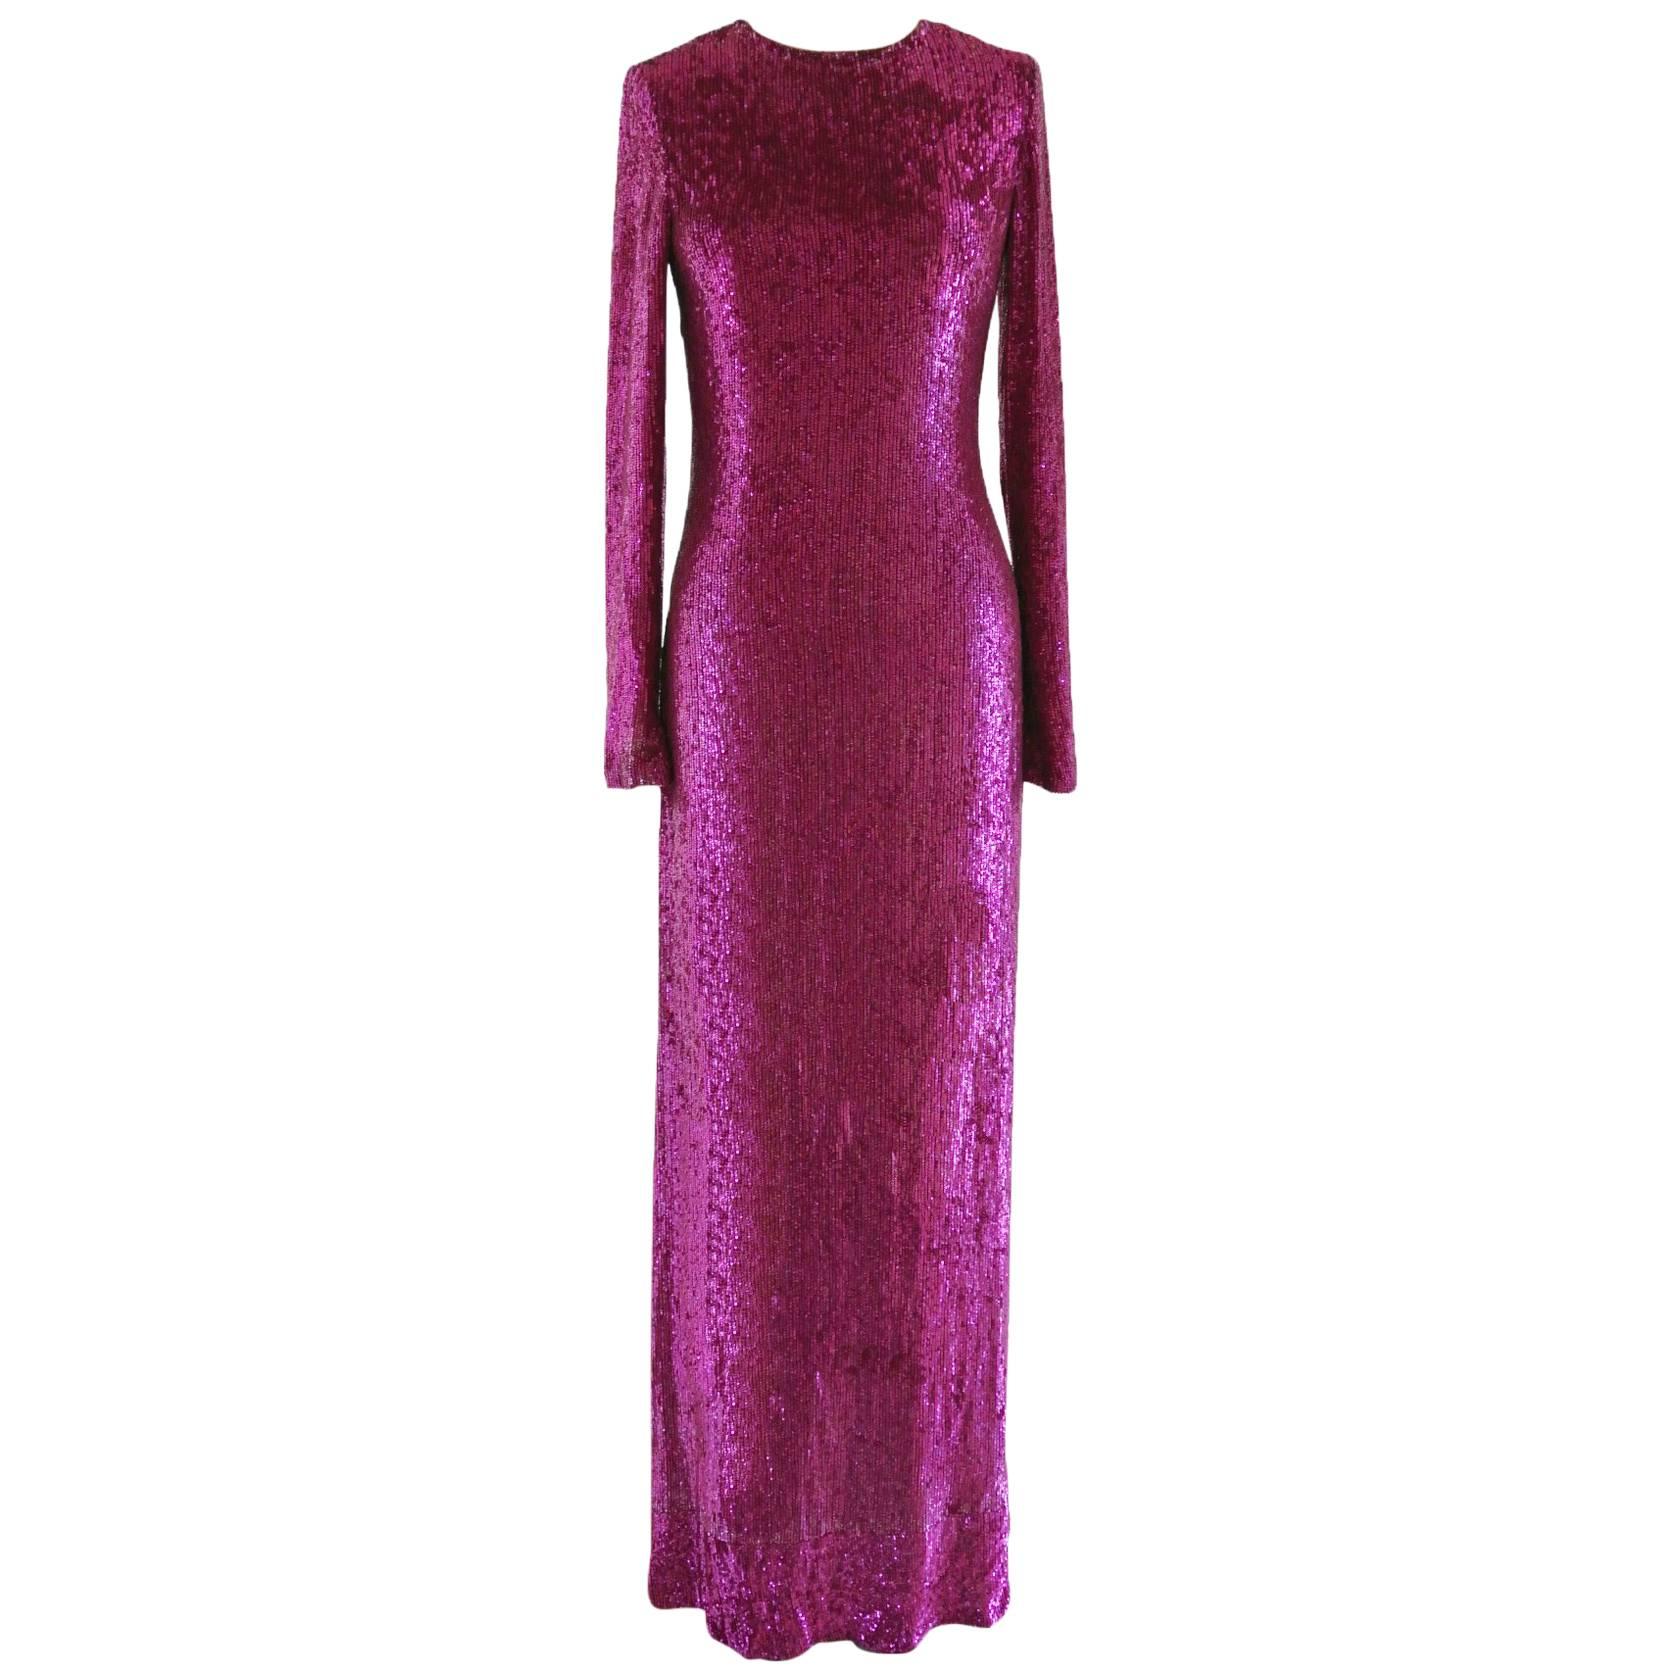 Lorry Newhouse Floor Length Sequin Dress with Long Sleeves - Raspberry Pink For Sale